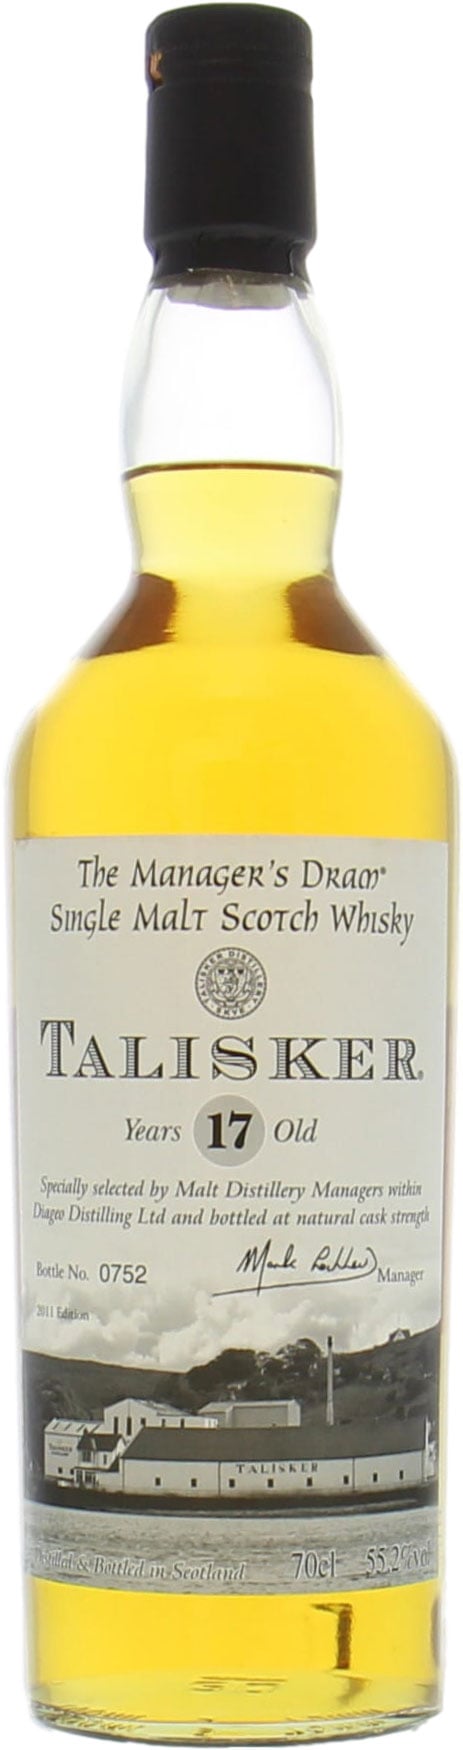 Talisker - 17 Years Old The Manager's Dram 55.2% NV